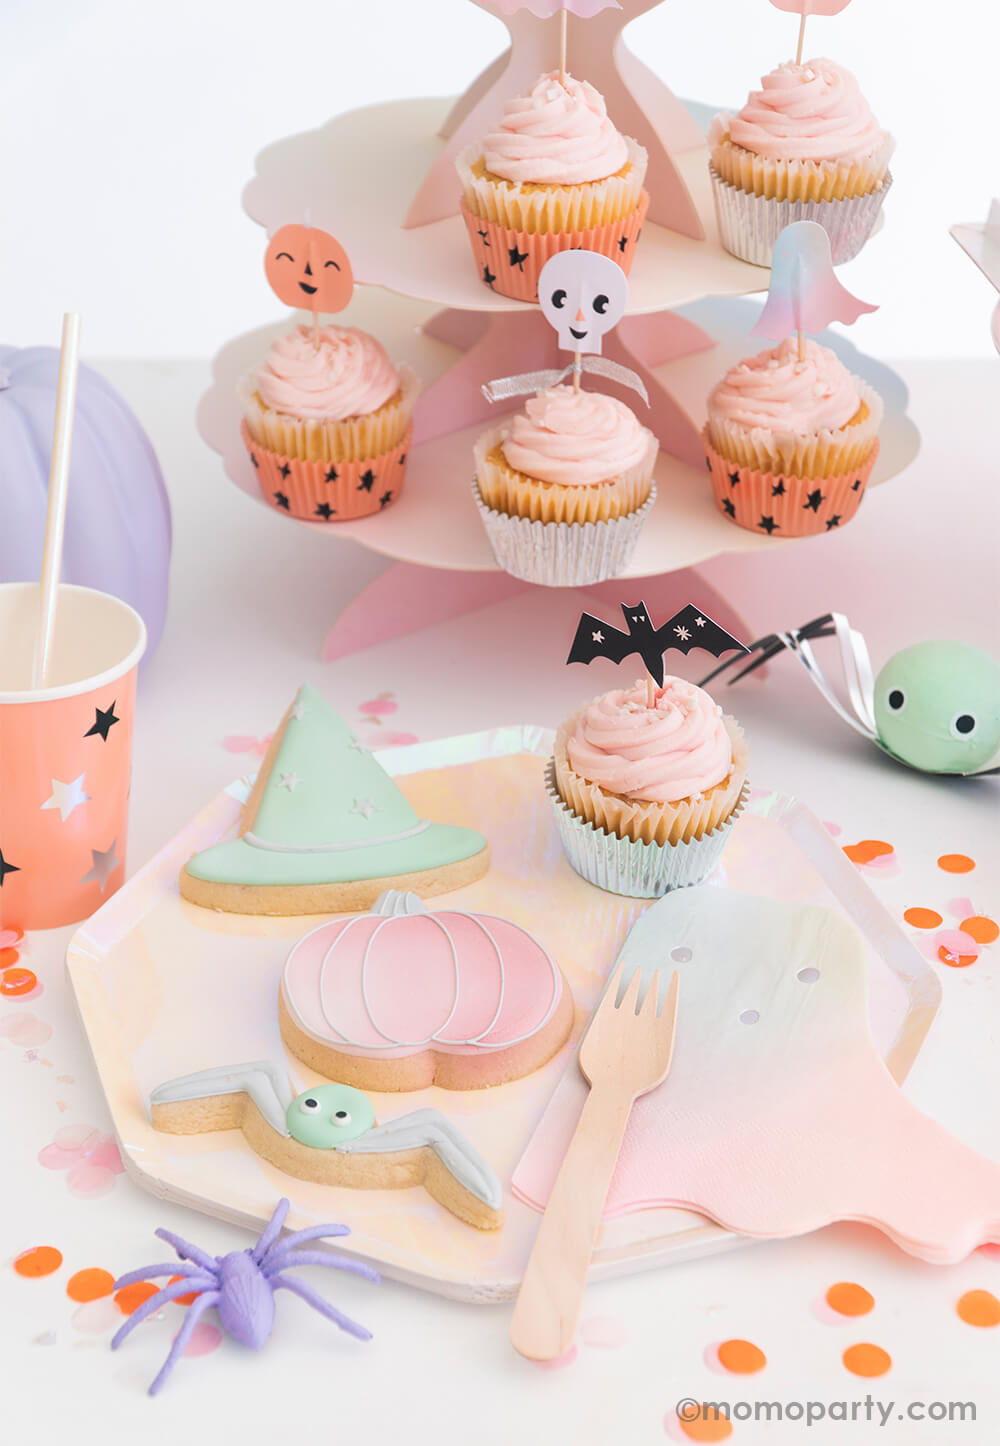 Pastel halloween party by momo party. Table set up with spider, pumpkin and witch hat shaped cookies, and a bat topper on a cupcake, Pastel Halloween ghost napkin and wooden fork on a Meri Meri iridescent dinner plate. A Pastel Halloween Star Pattern Cup and mint spider surprise ball and confetti around the plate. cupcakes decorated with Pastel Halloween Cupcake Kit with 6 terrific designs of toppers - skulls, stars, pumpkins, ghosts on a pastel pink cake stand, Halloween party supplies for pink halloween